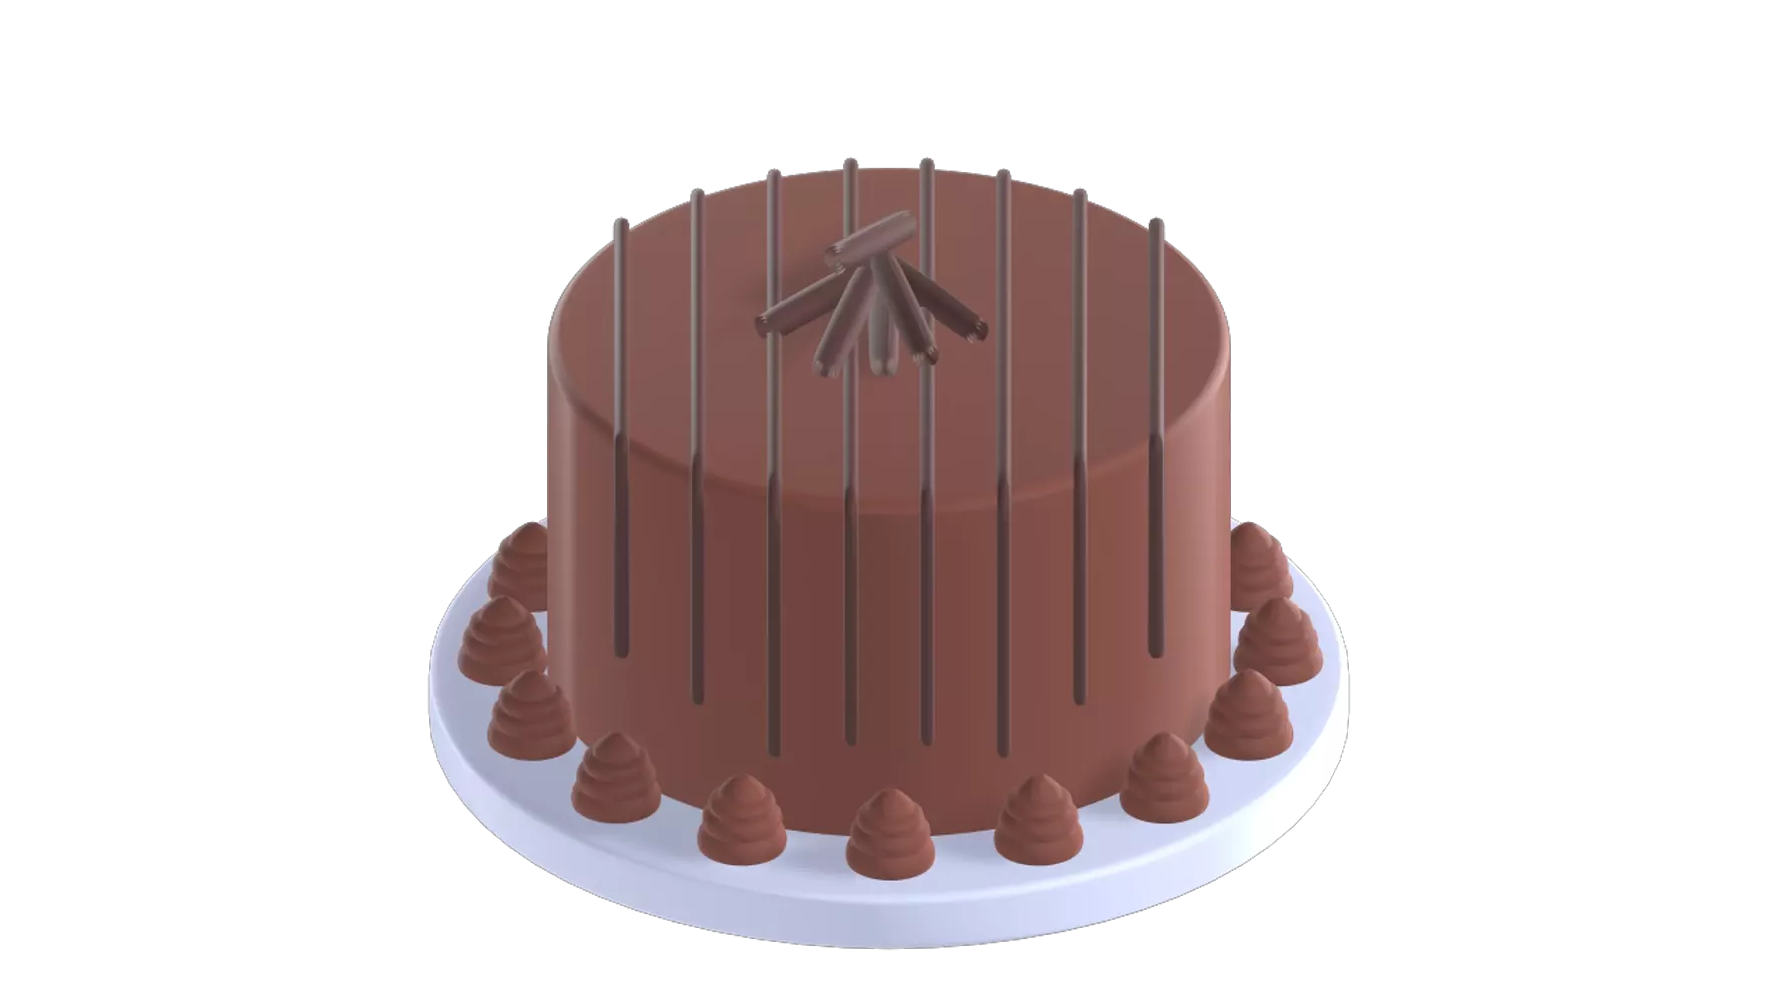 Cake With Chocolate Rolls 3D Graphic